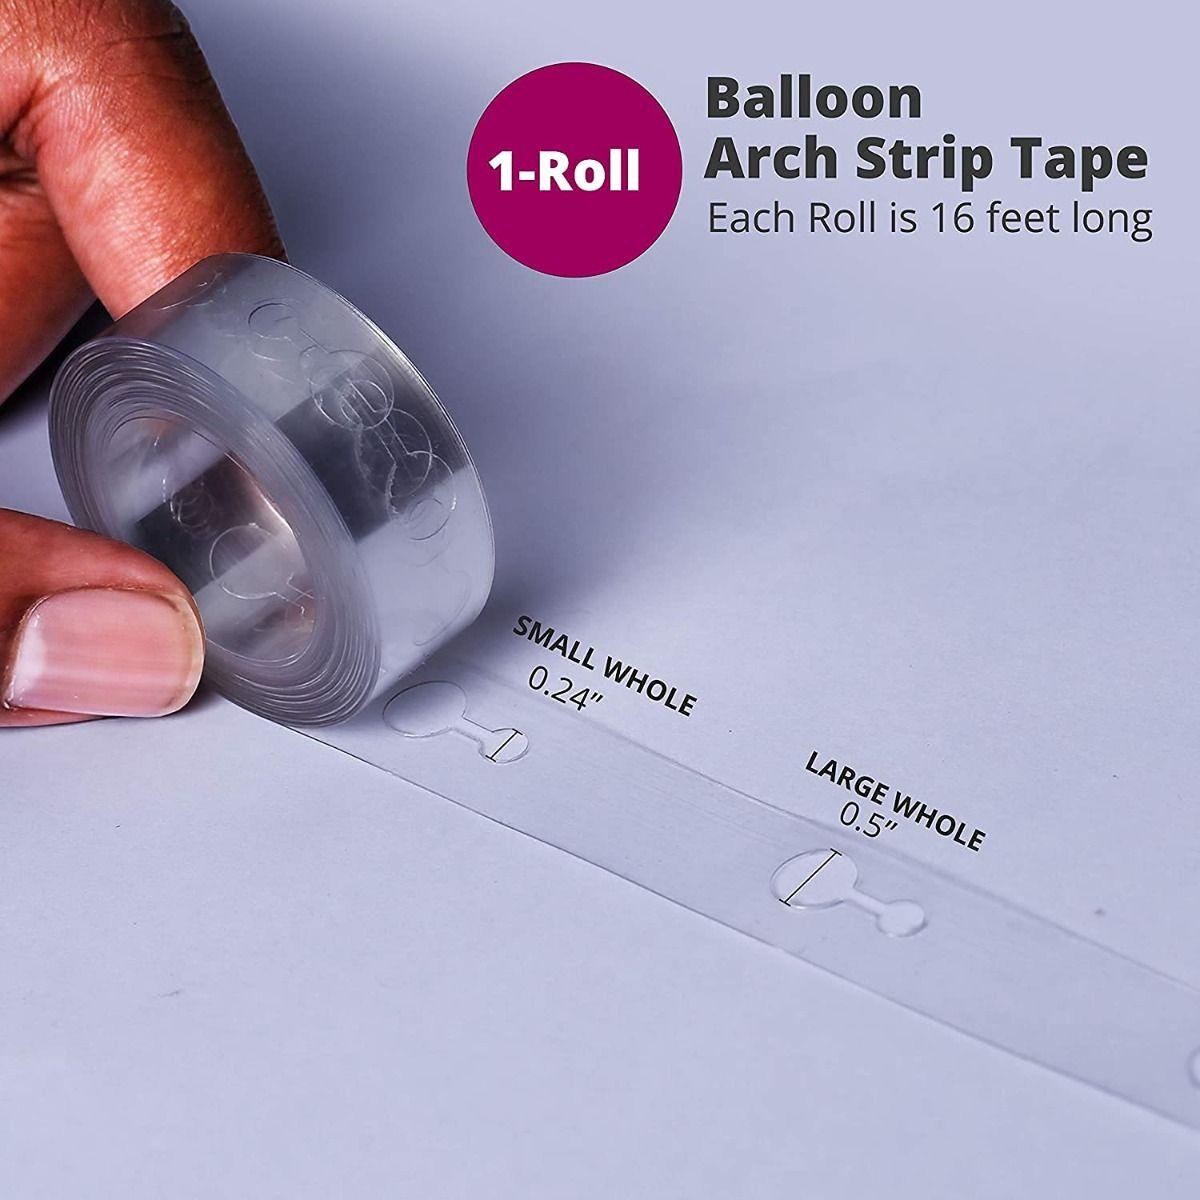 100 Pcs/lot Glue Point Clear Balloon Removable Adhesive Dots Double Sided  Dots of Glue Tape